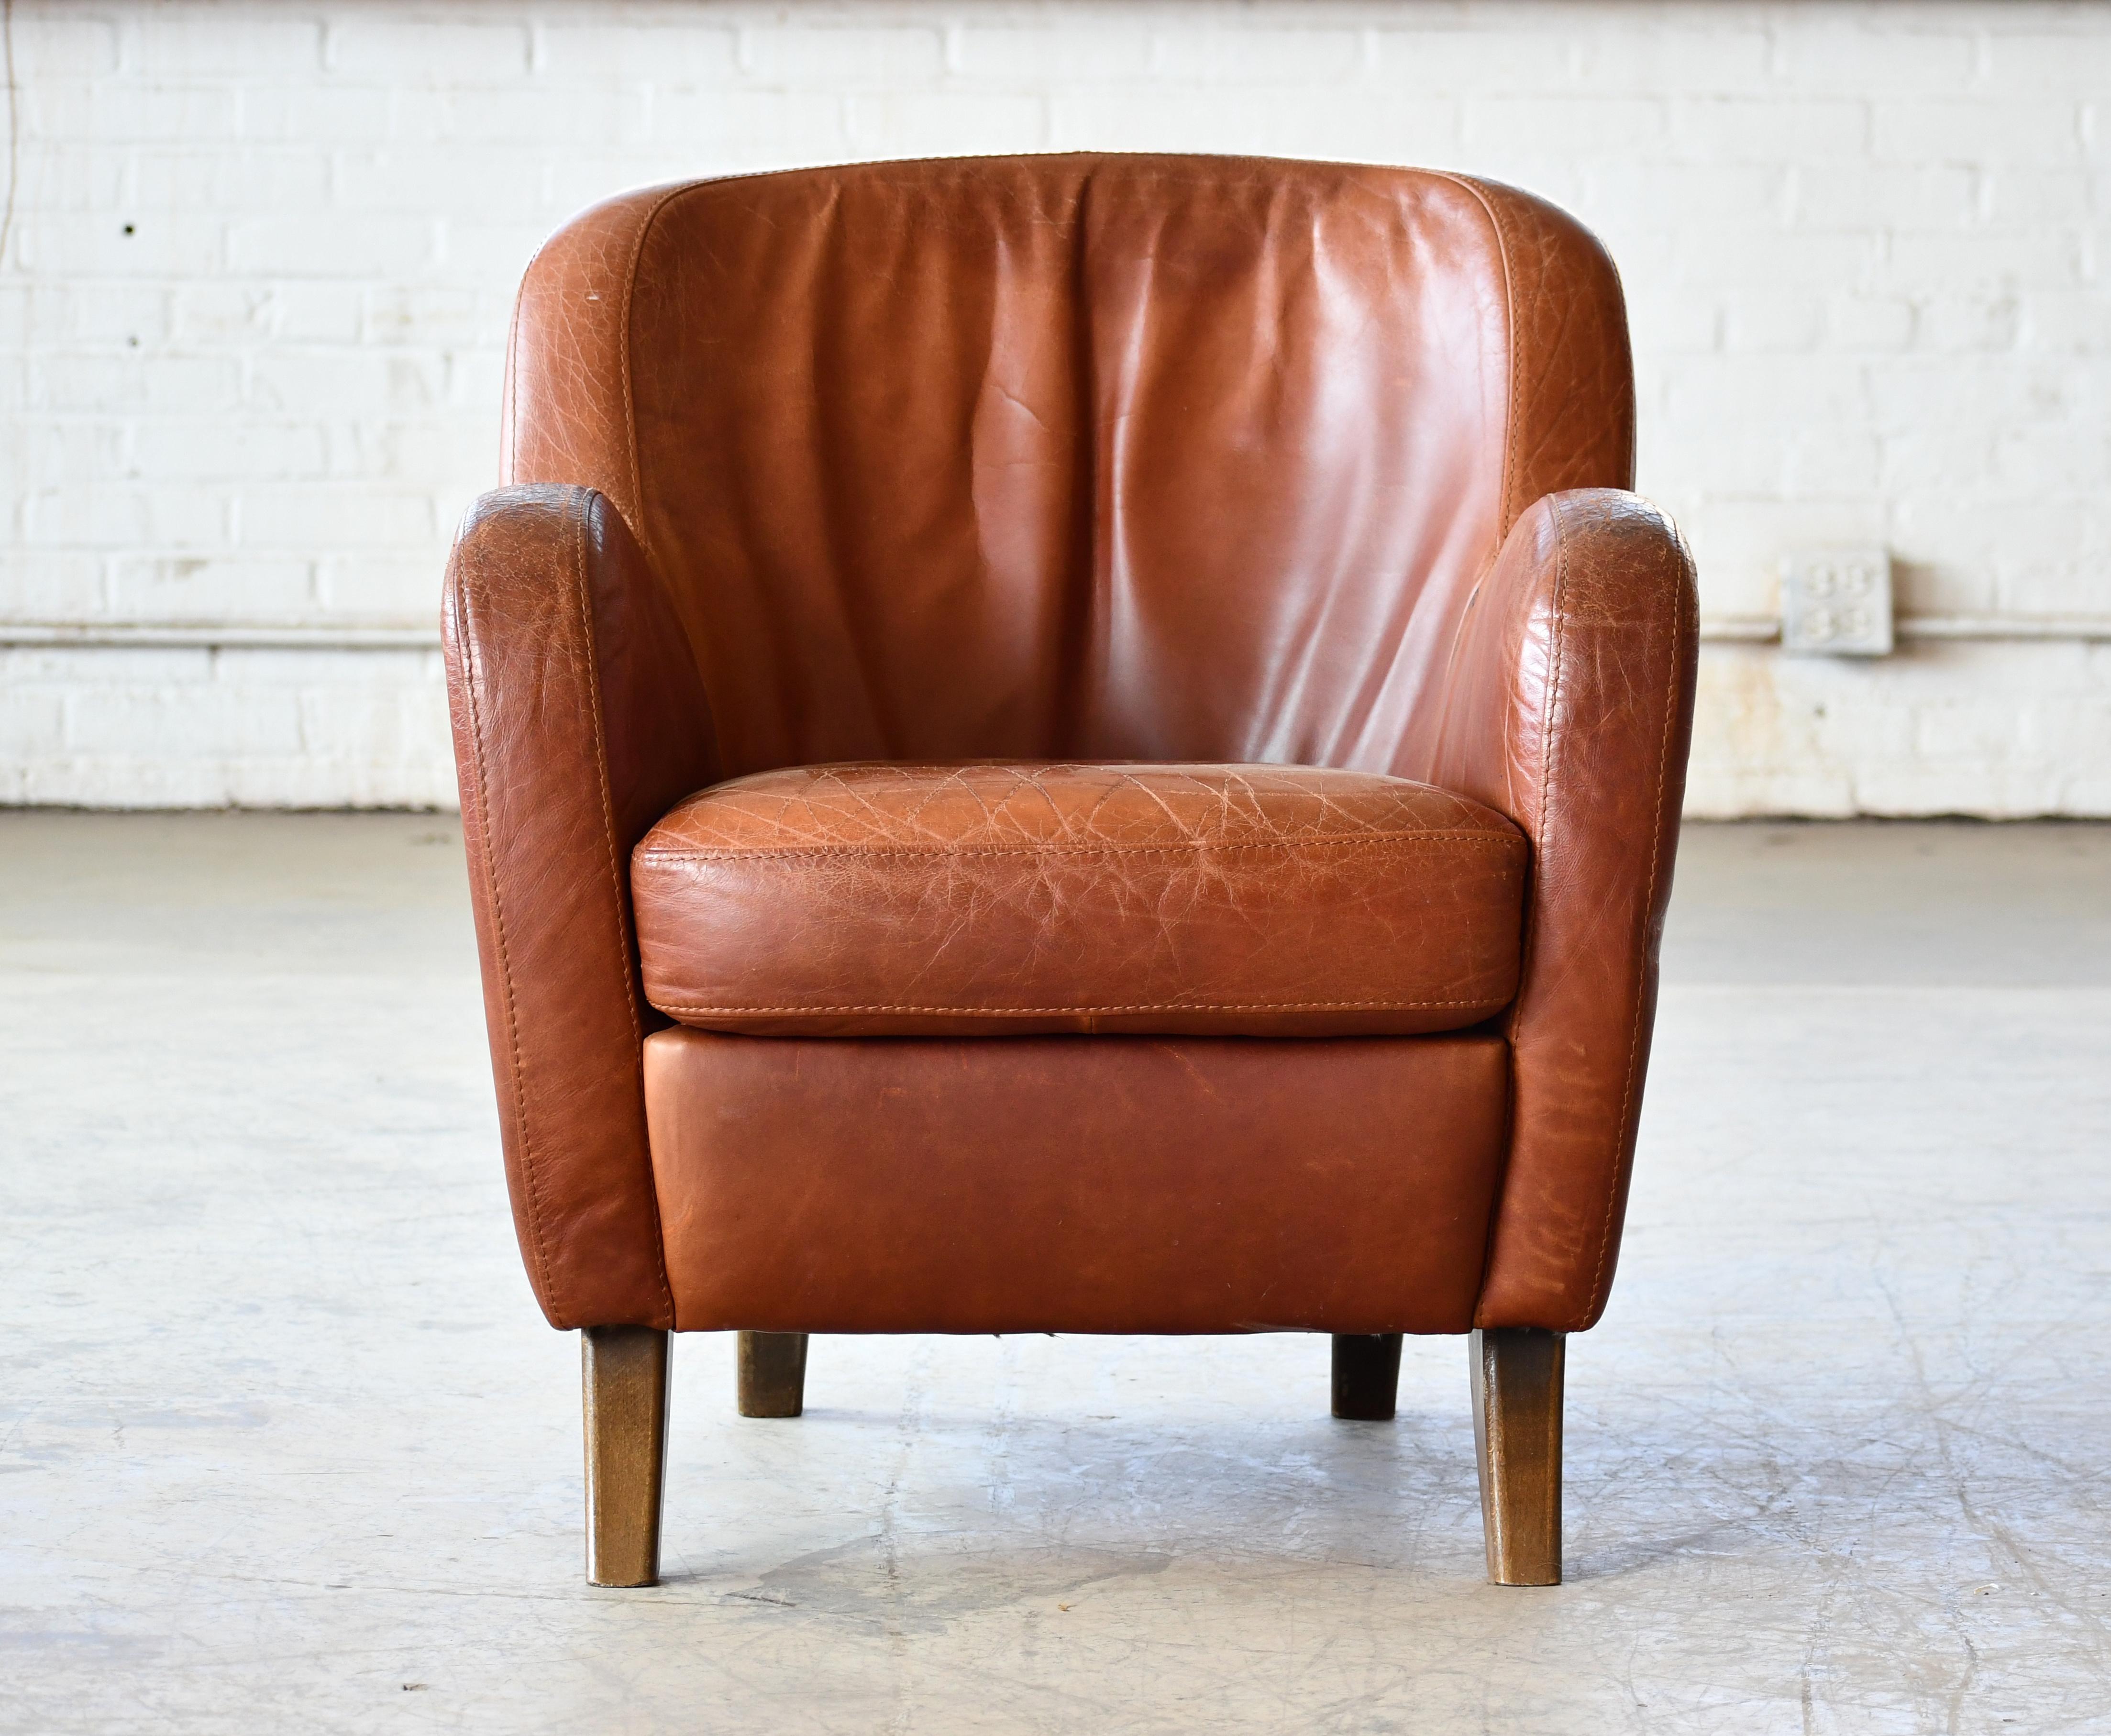 We found this bold and curvy armchair in Denmark but are not sure of the maker and Designer as the chair is unmarked.  The chair has a slight tilt backwards and a similar style and stance as the famous 1940's chair from Berga Mobler but it is of